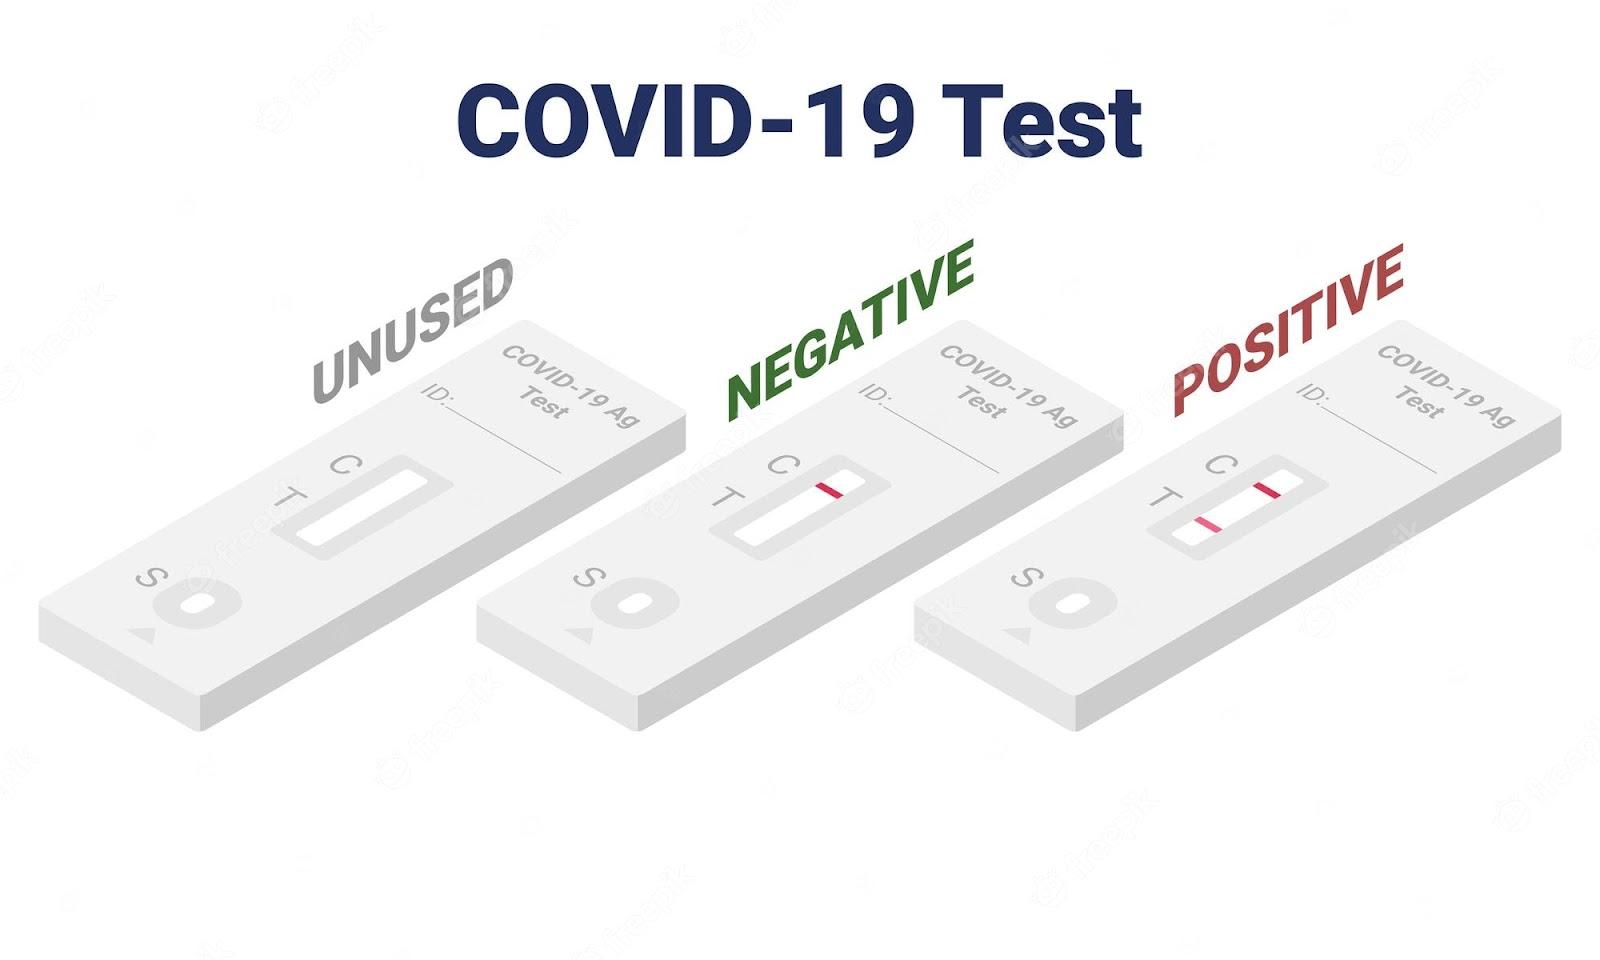 Image of Covid 19 Test Results via Freeimages.